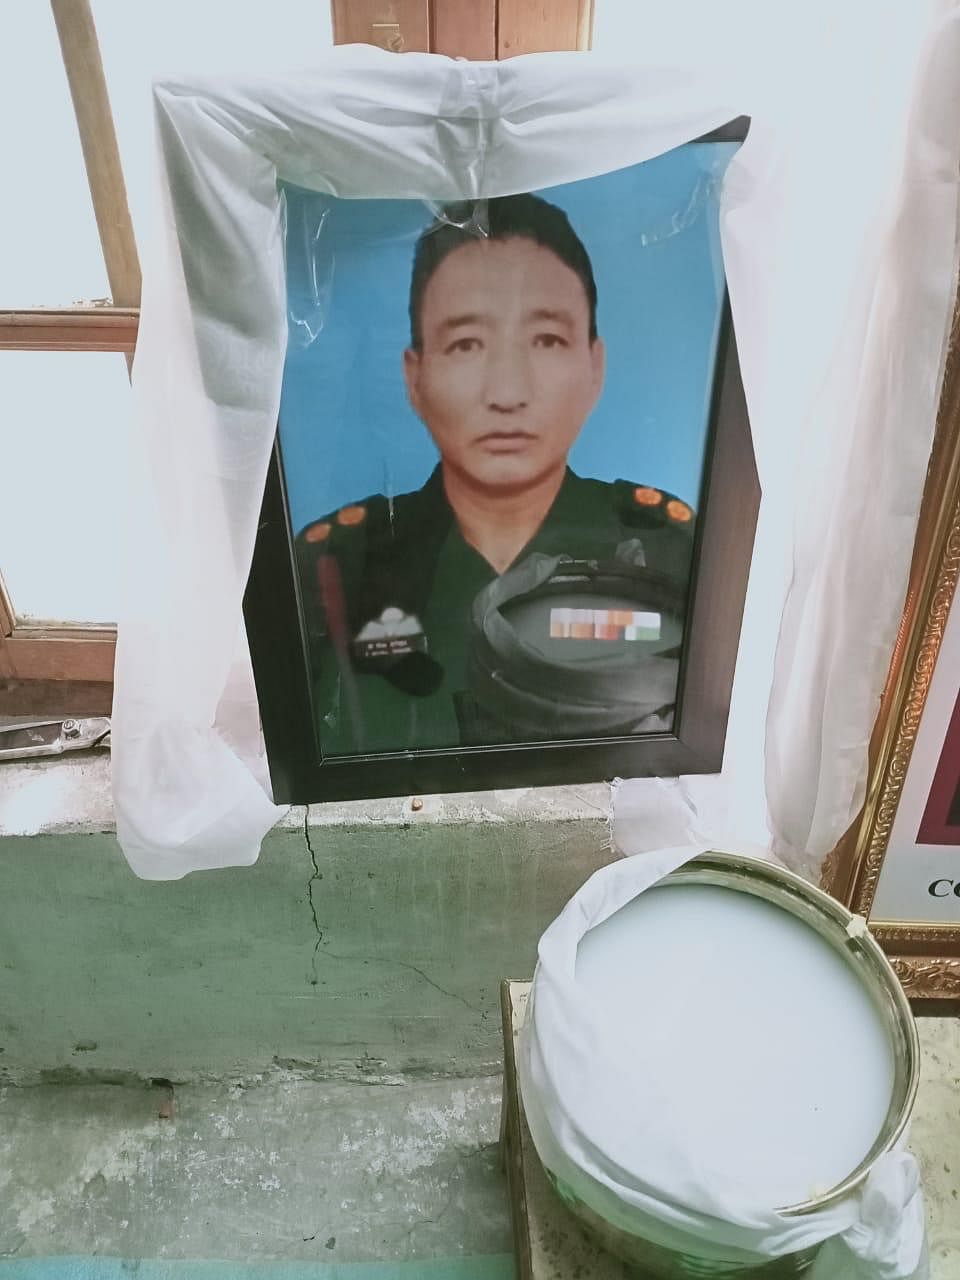 EXPLAINER: India’s ‘secret weapon’ against China, the Special Frontier Force that recruits Tibetans. 